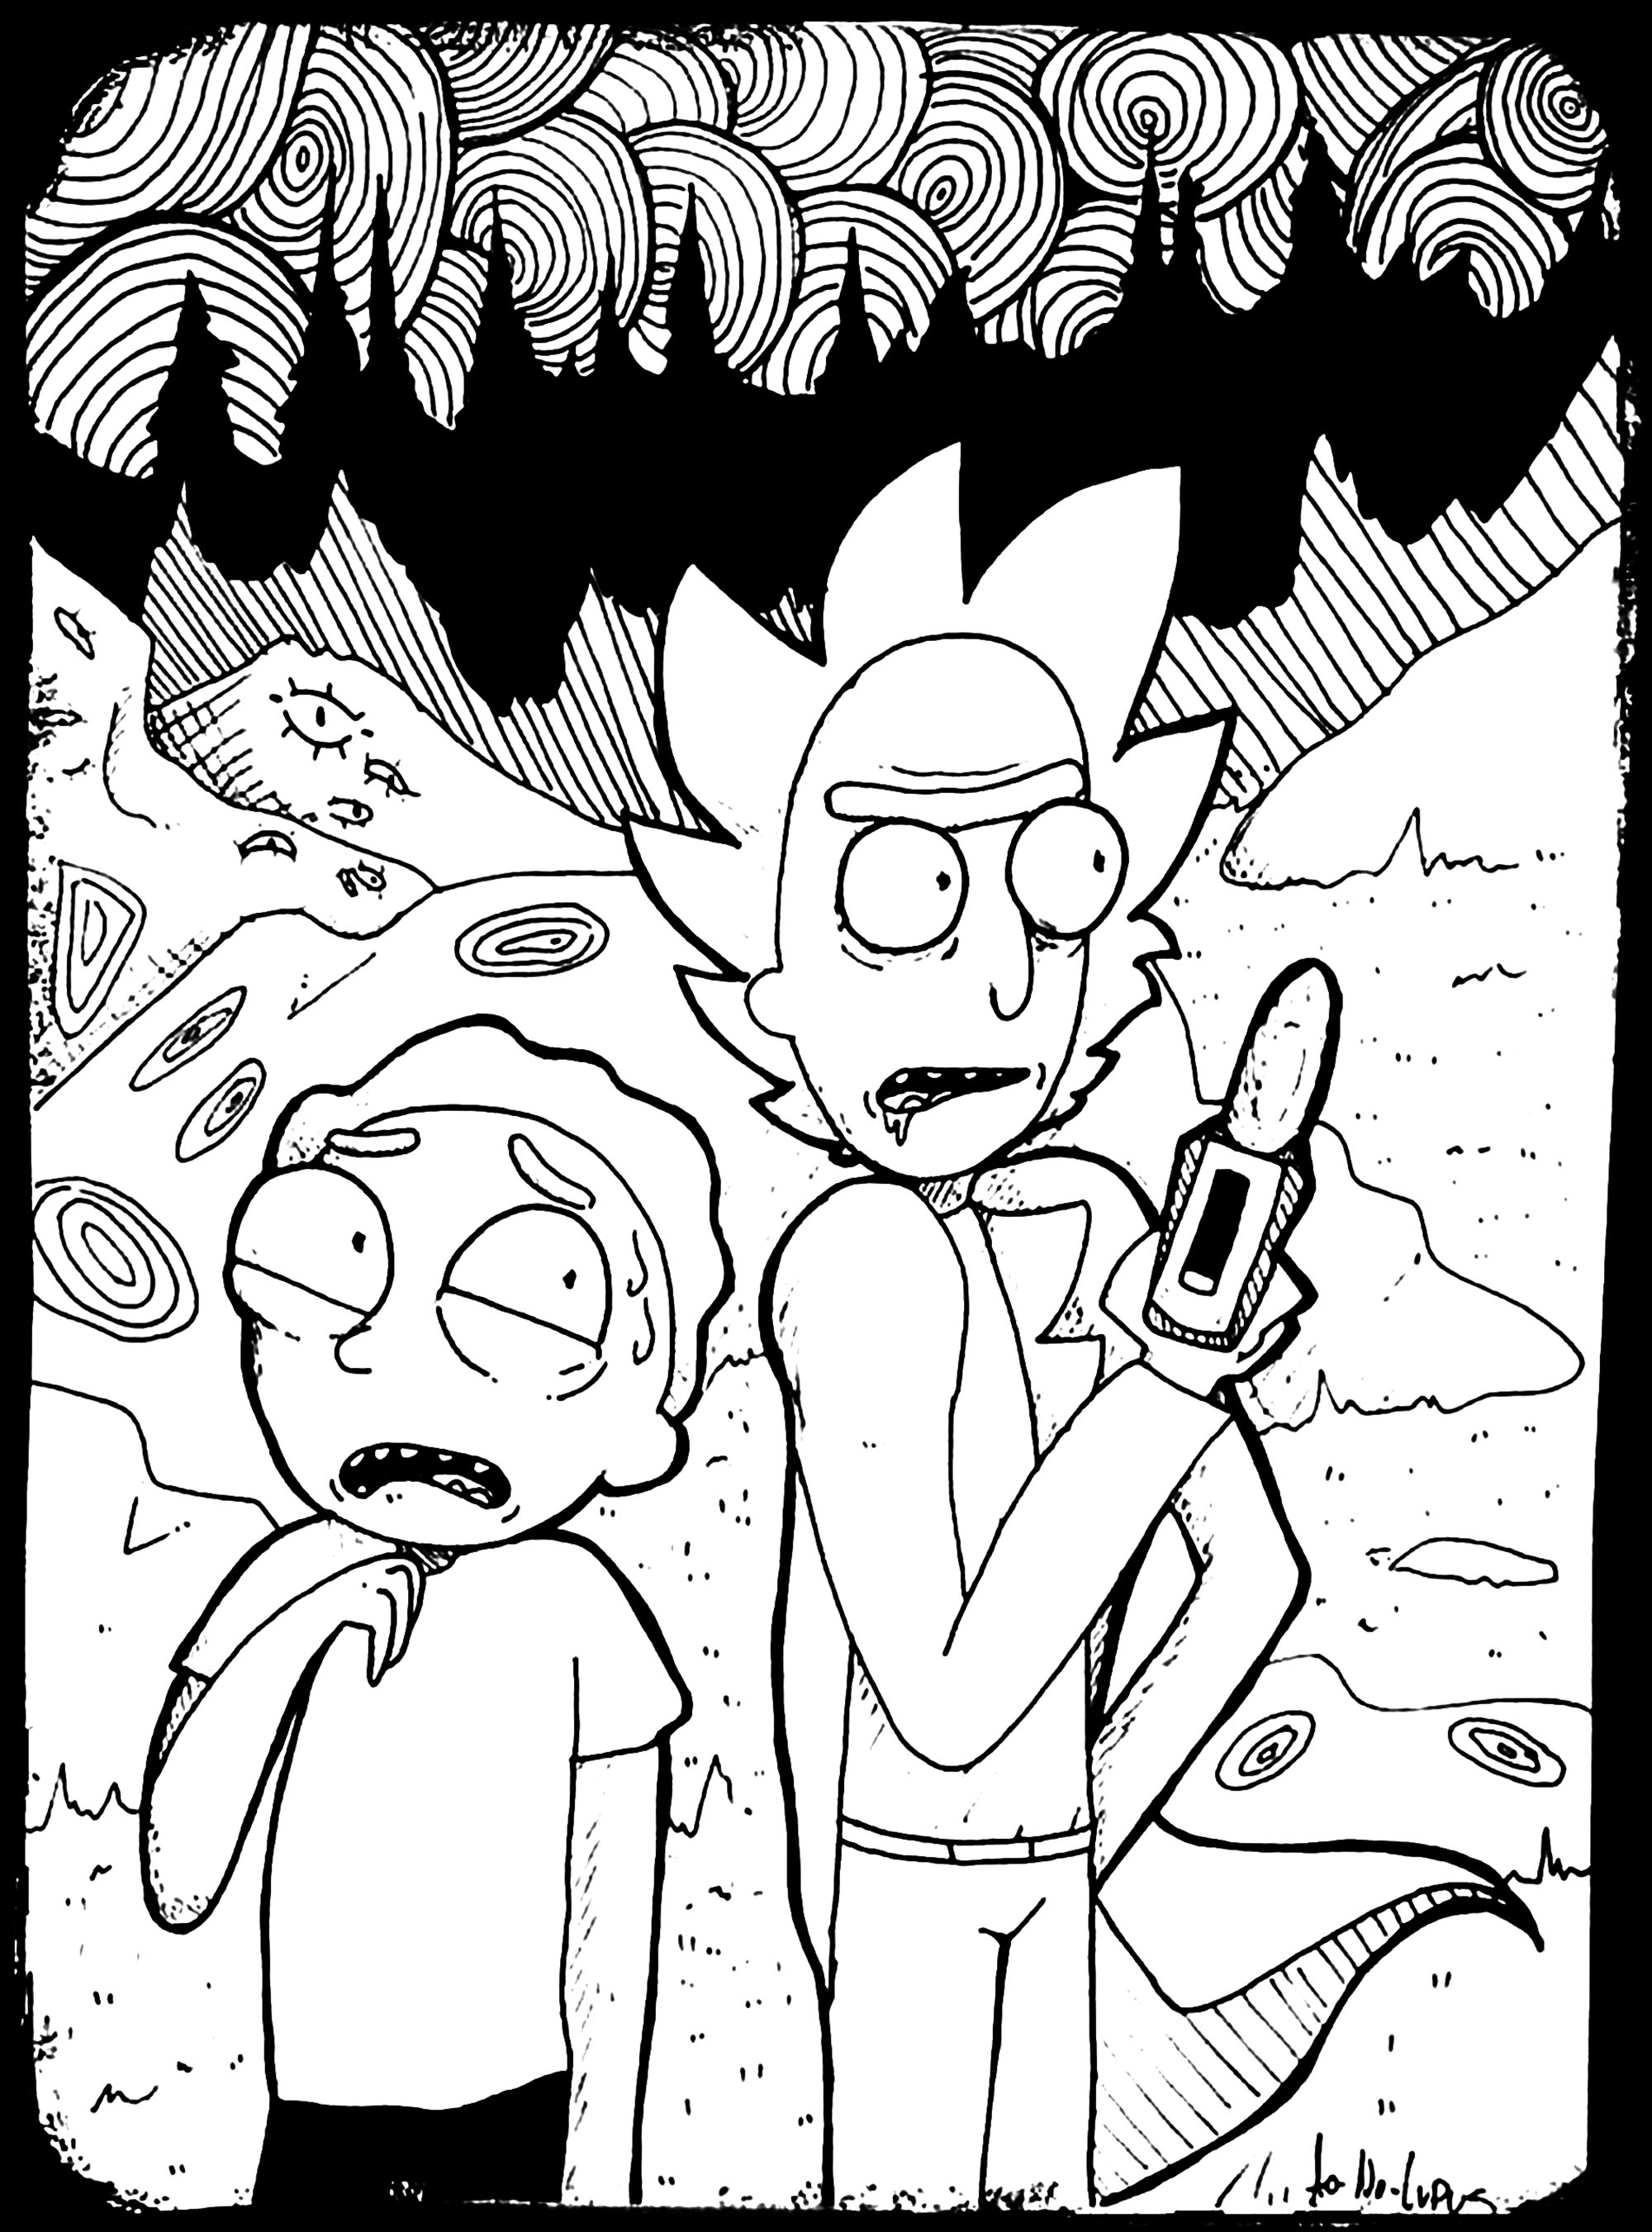 Drawing of the mad scientist Rick Sanchez and his grandson Morty Smith on a strange planet. Created from a fan-art by 'Ao-No-Lupus'.